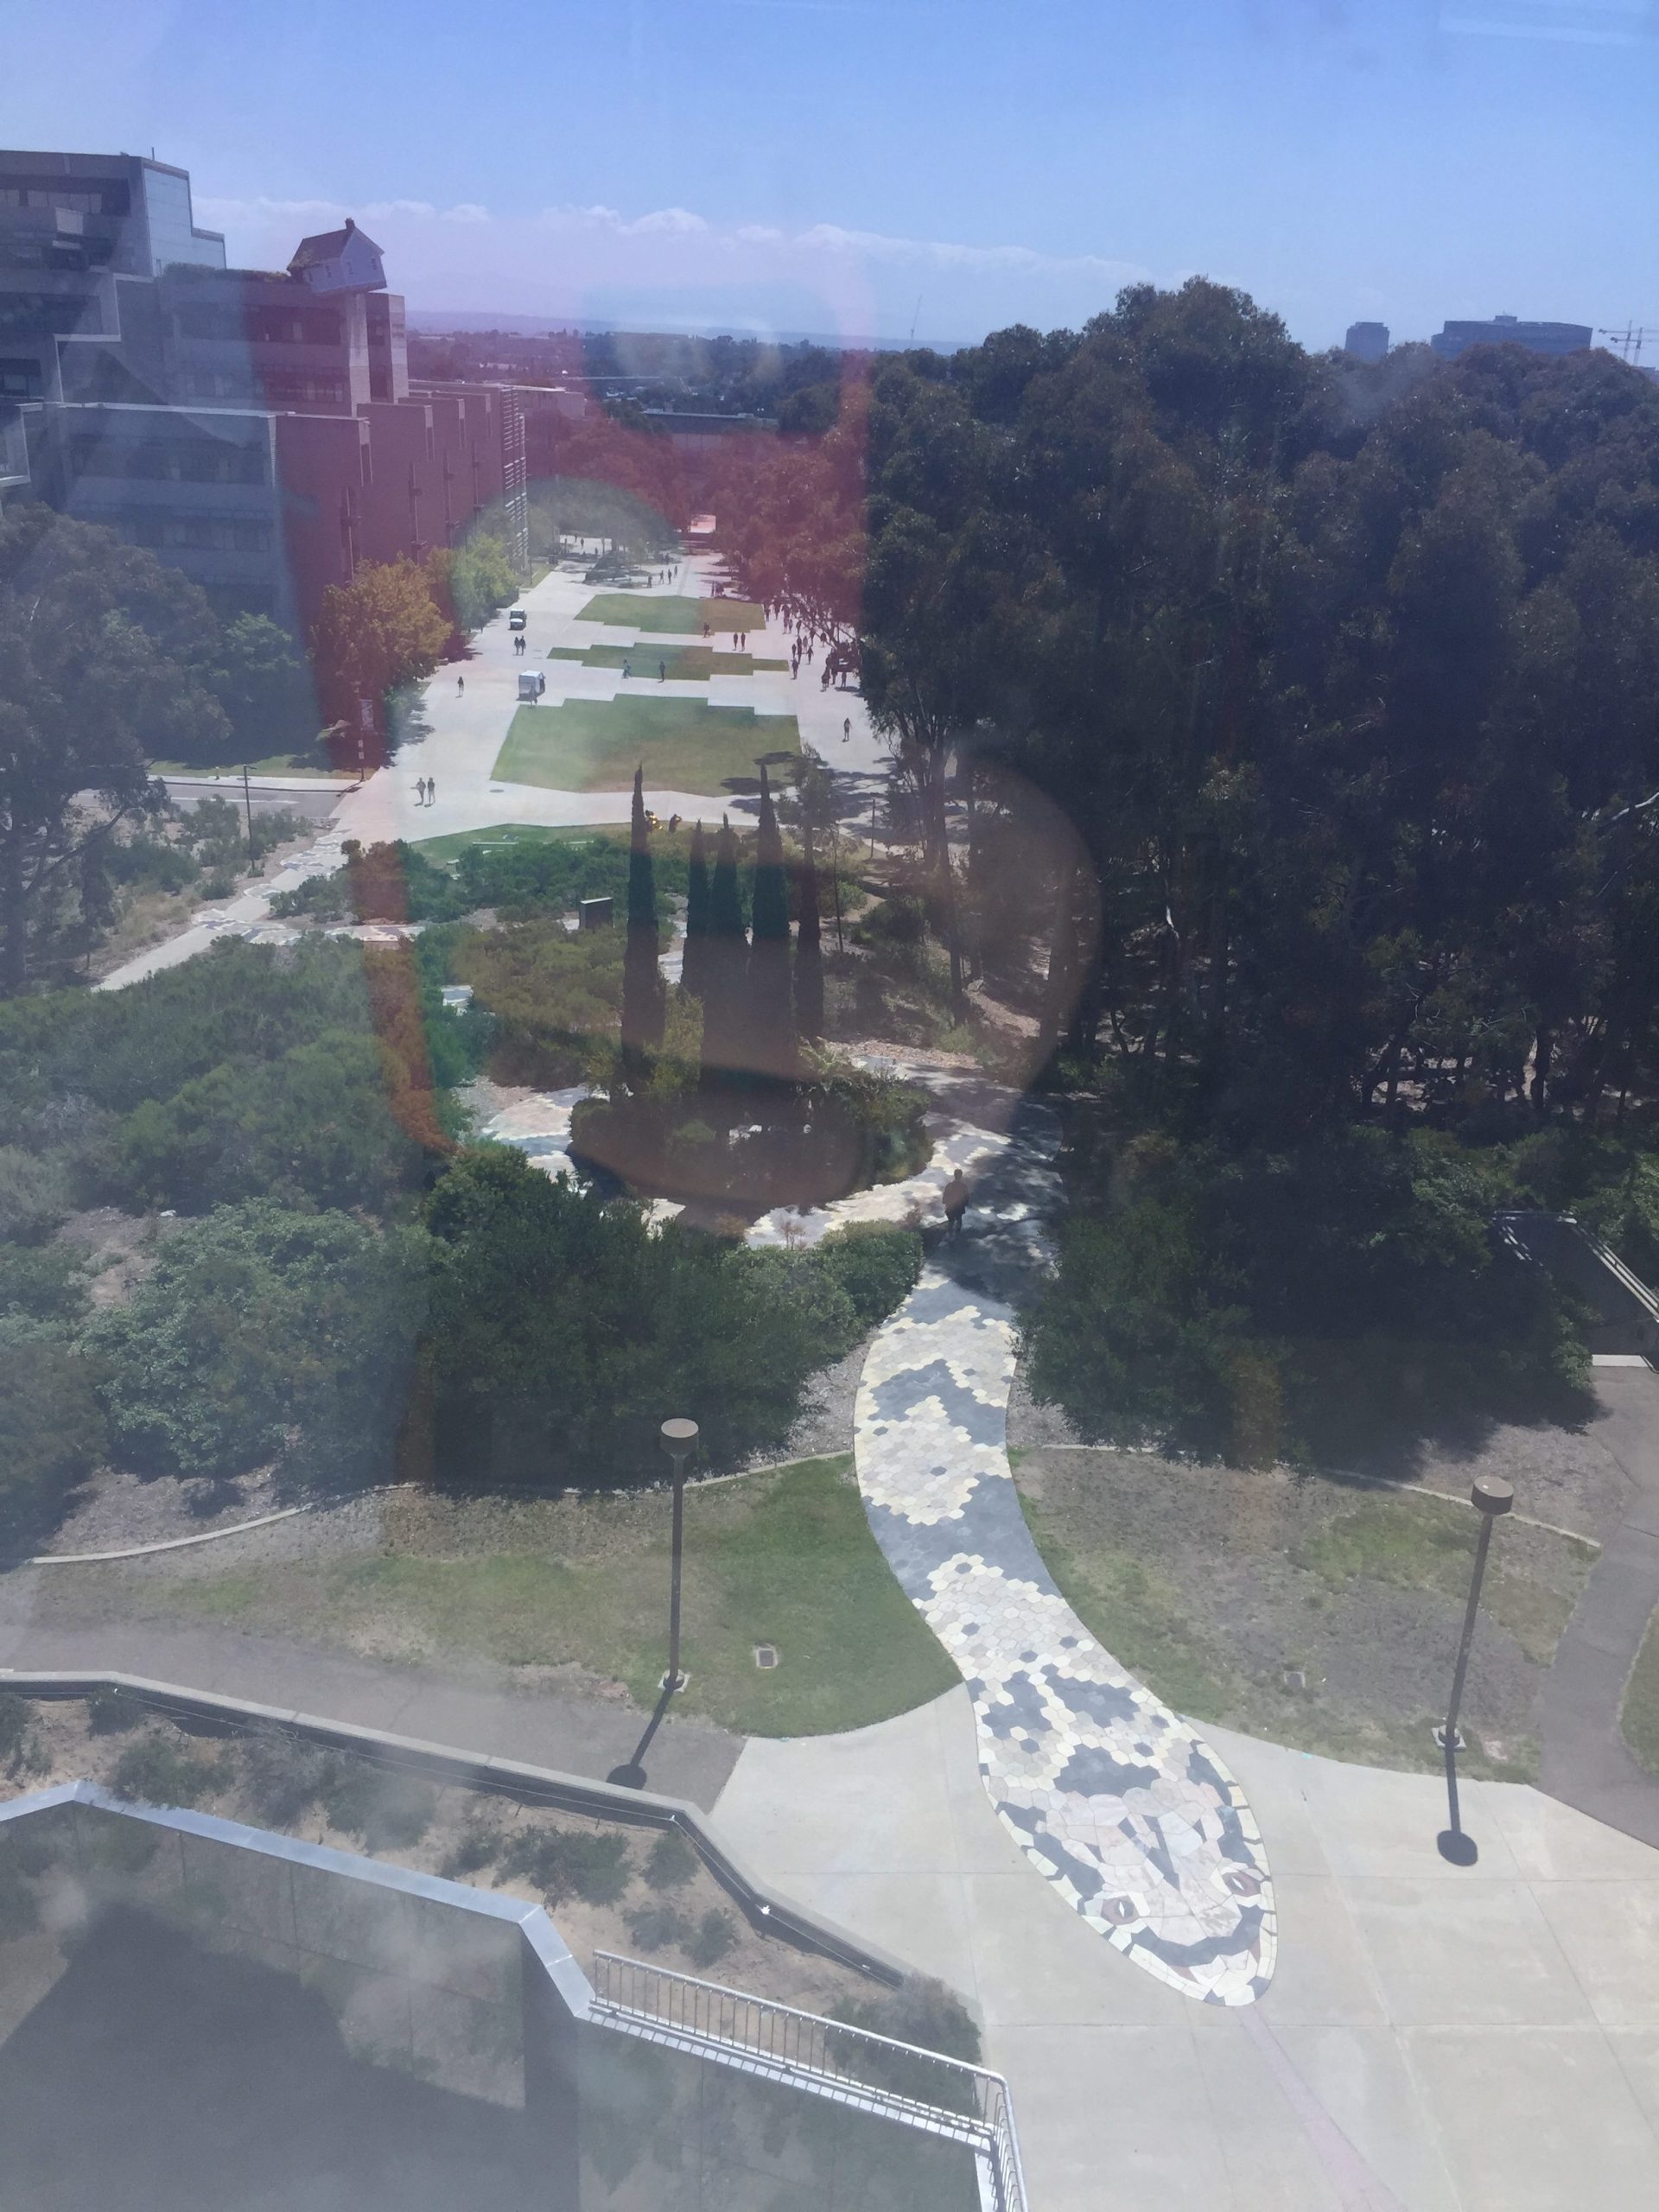 Geisel Library whimsical design — one of the nicest libraries in the world (UCSD)